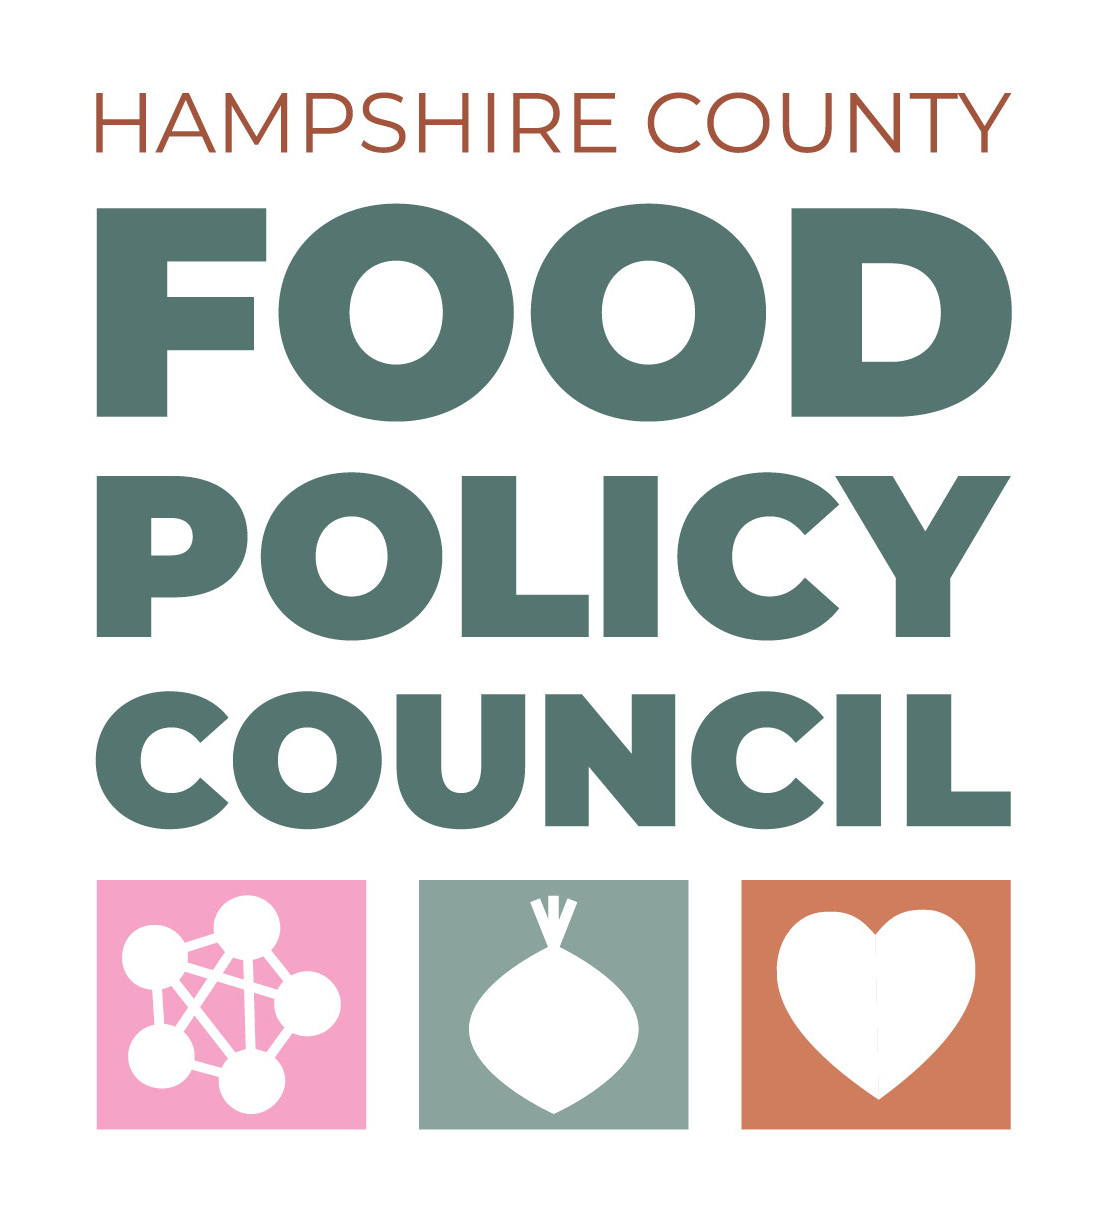 Hampshire County Food Policy Council logo - stacked text